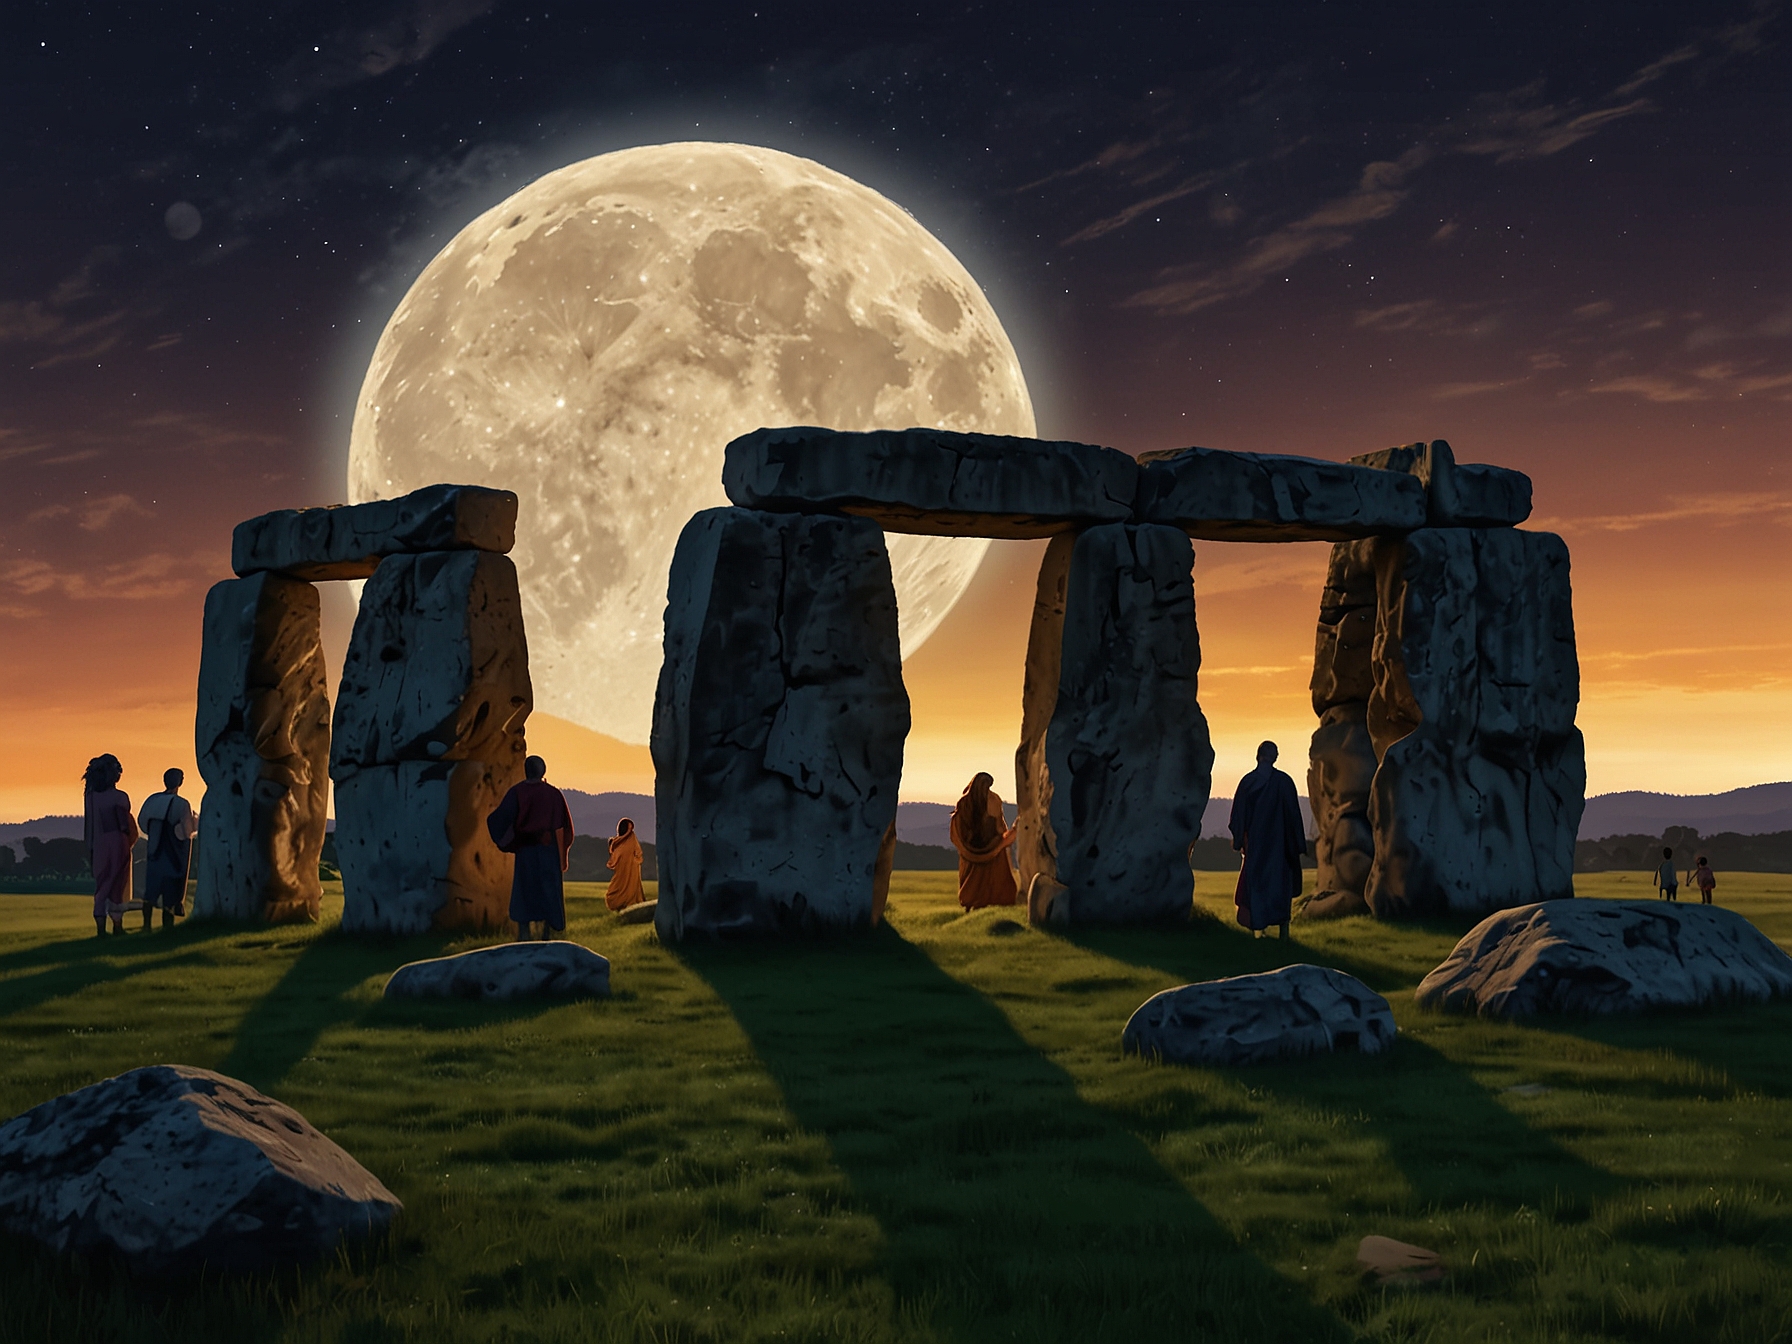 A depiction of people gathered at Stonehenge during the summer solstice, watching the sunrise as the full moon sets. This image captures the blend of ancient traditions and natural wonders during this celestial event.